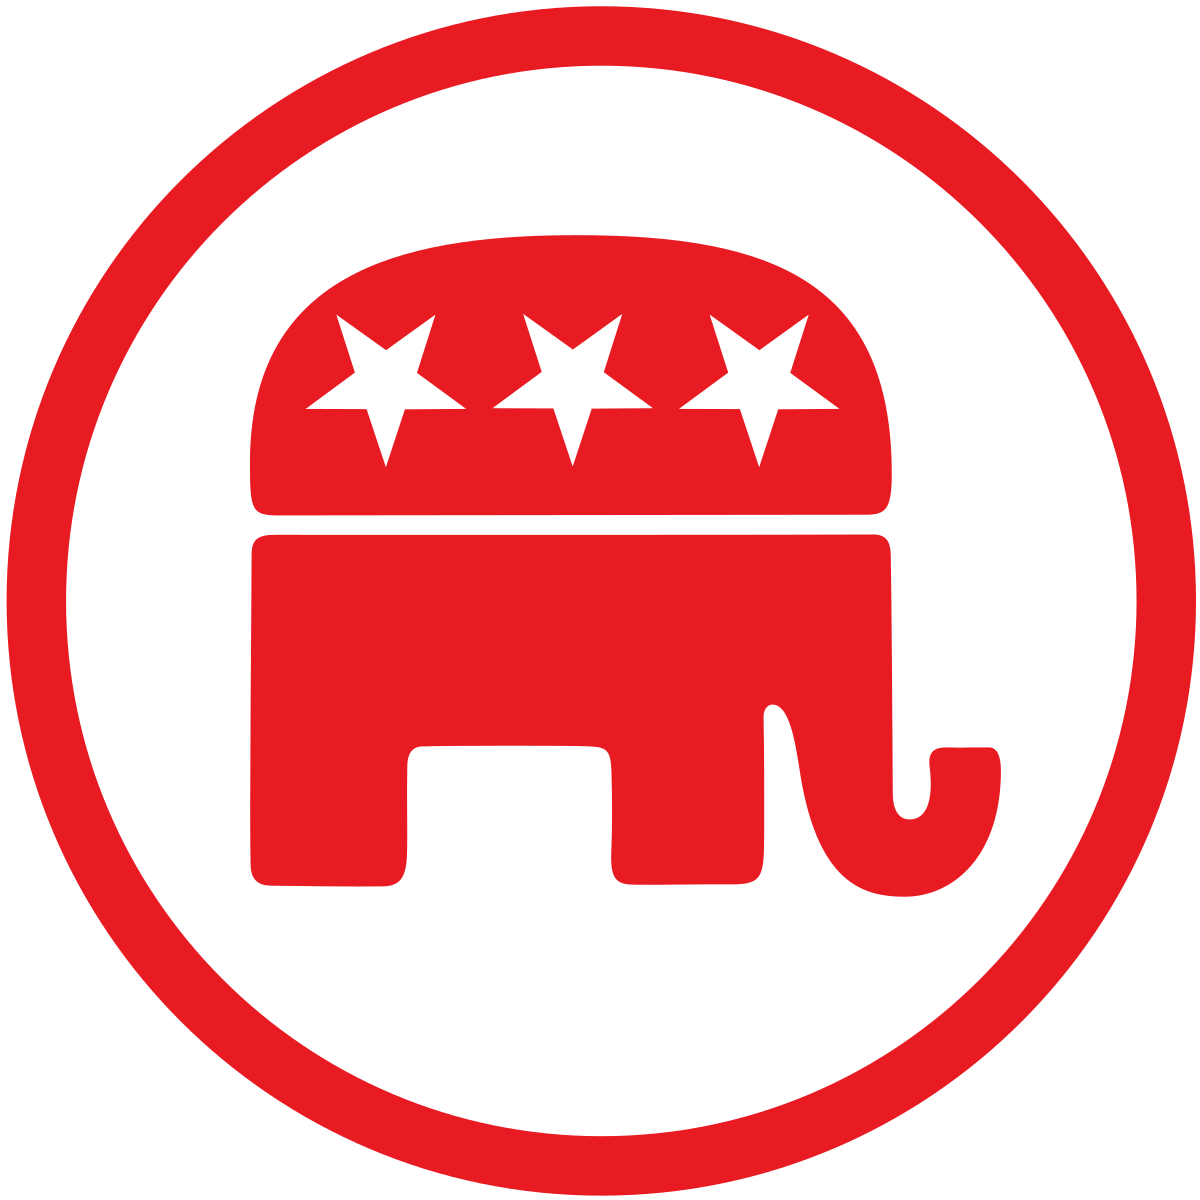 republican party (united states)